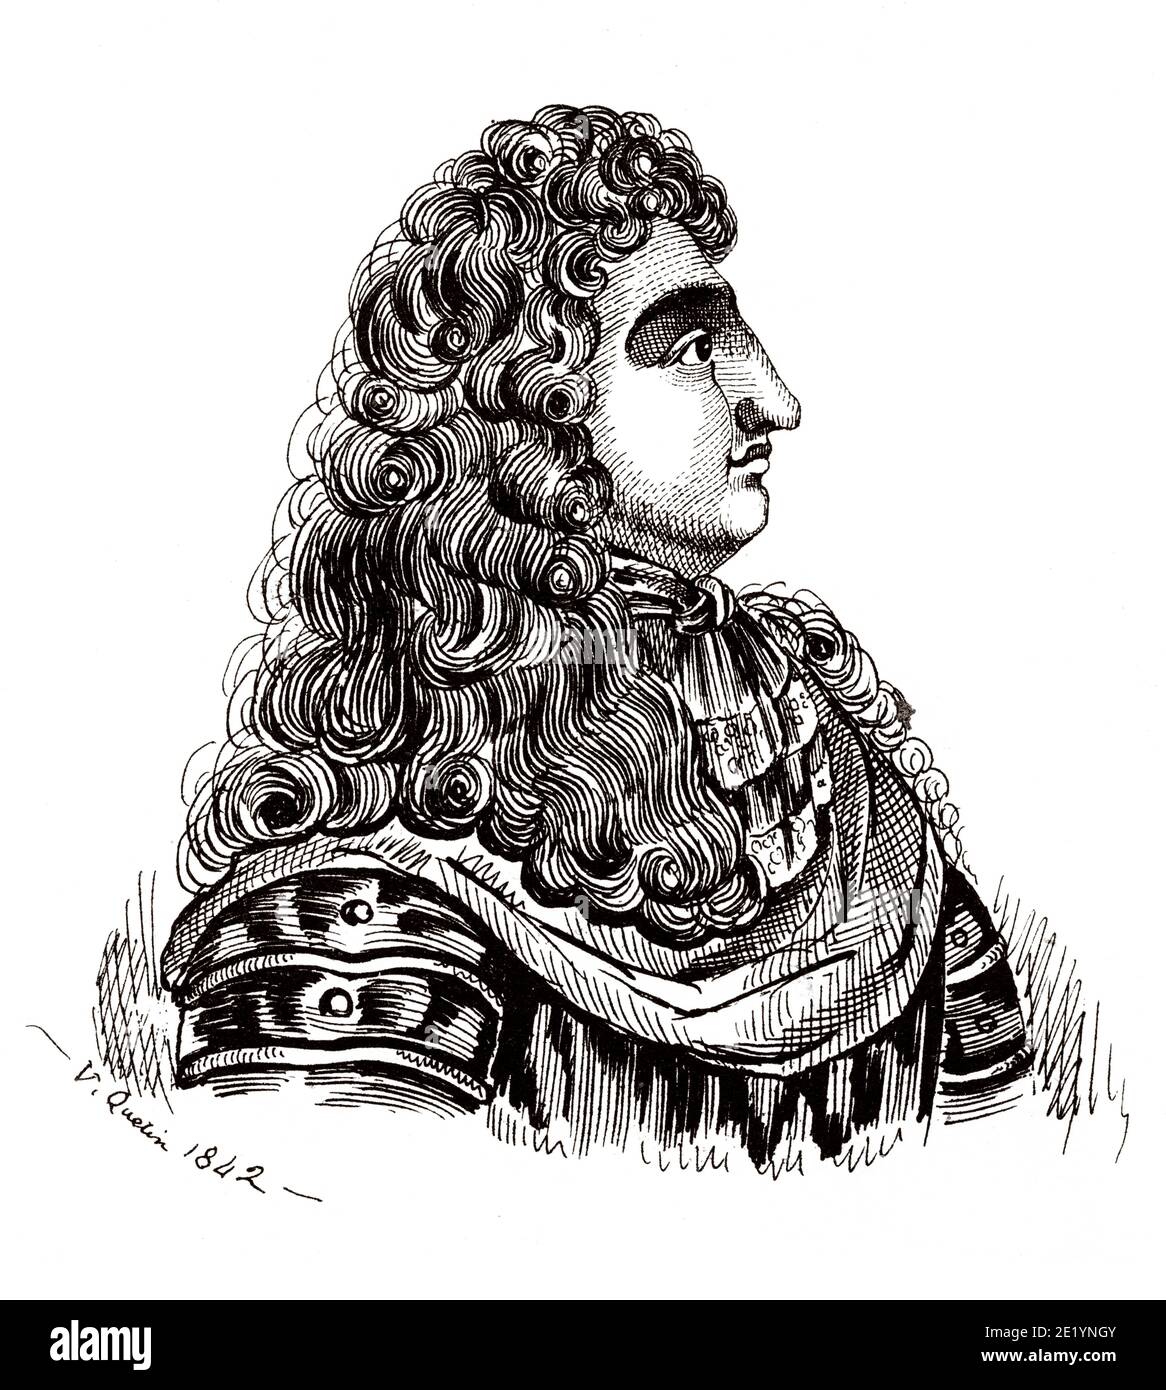 Portrait of Louis XIV the Great, the Sun King (1638 - 1715). King of France from 1643 to 1715. House of Bourbon. History of France, from the book Atlas de la France 1842 Stock Photo